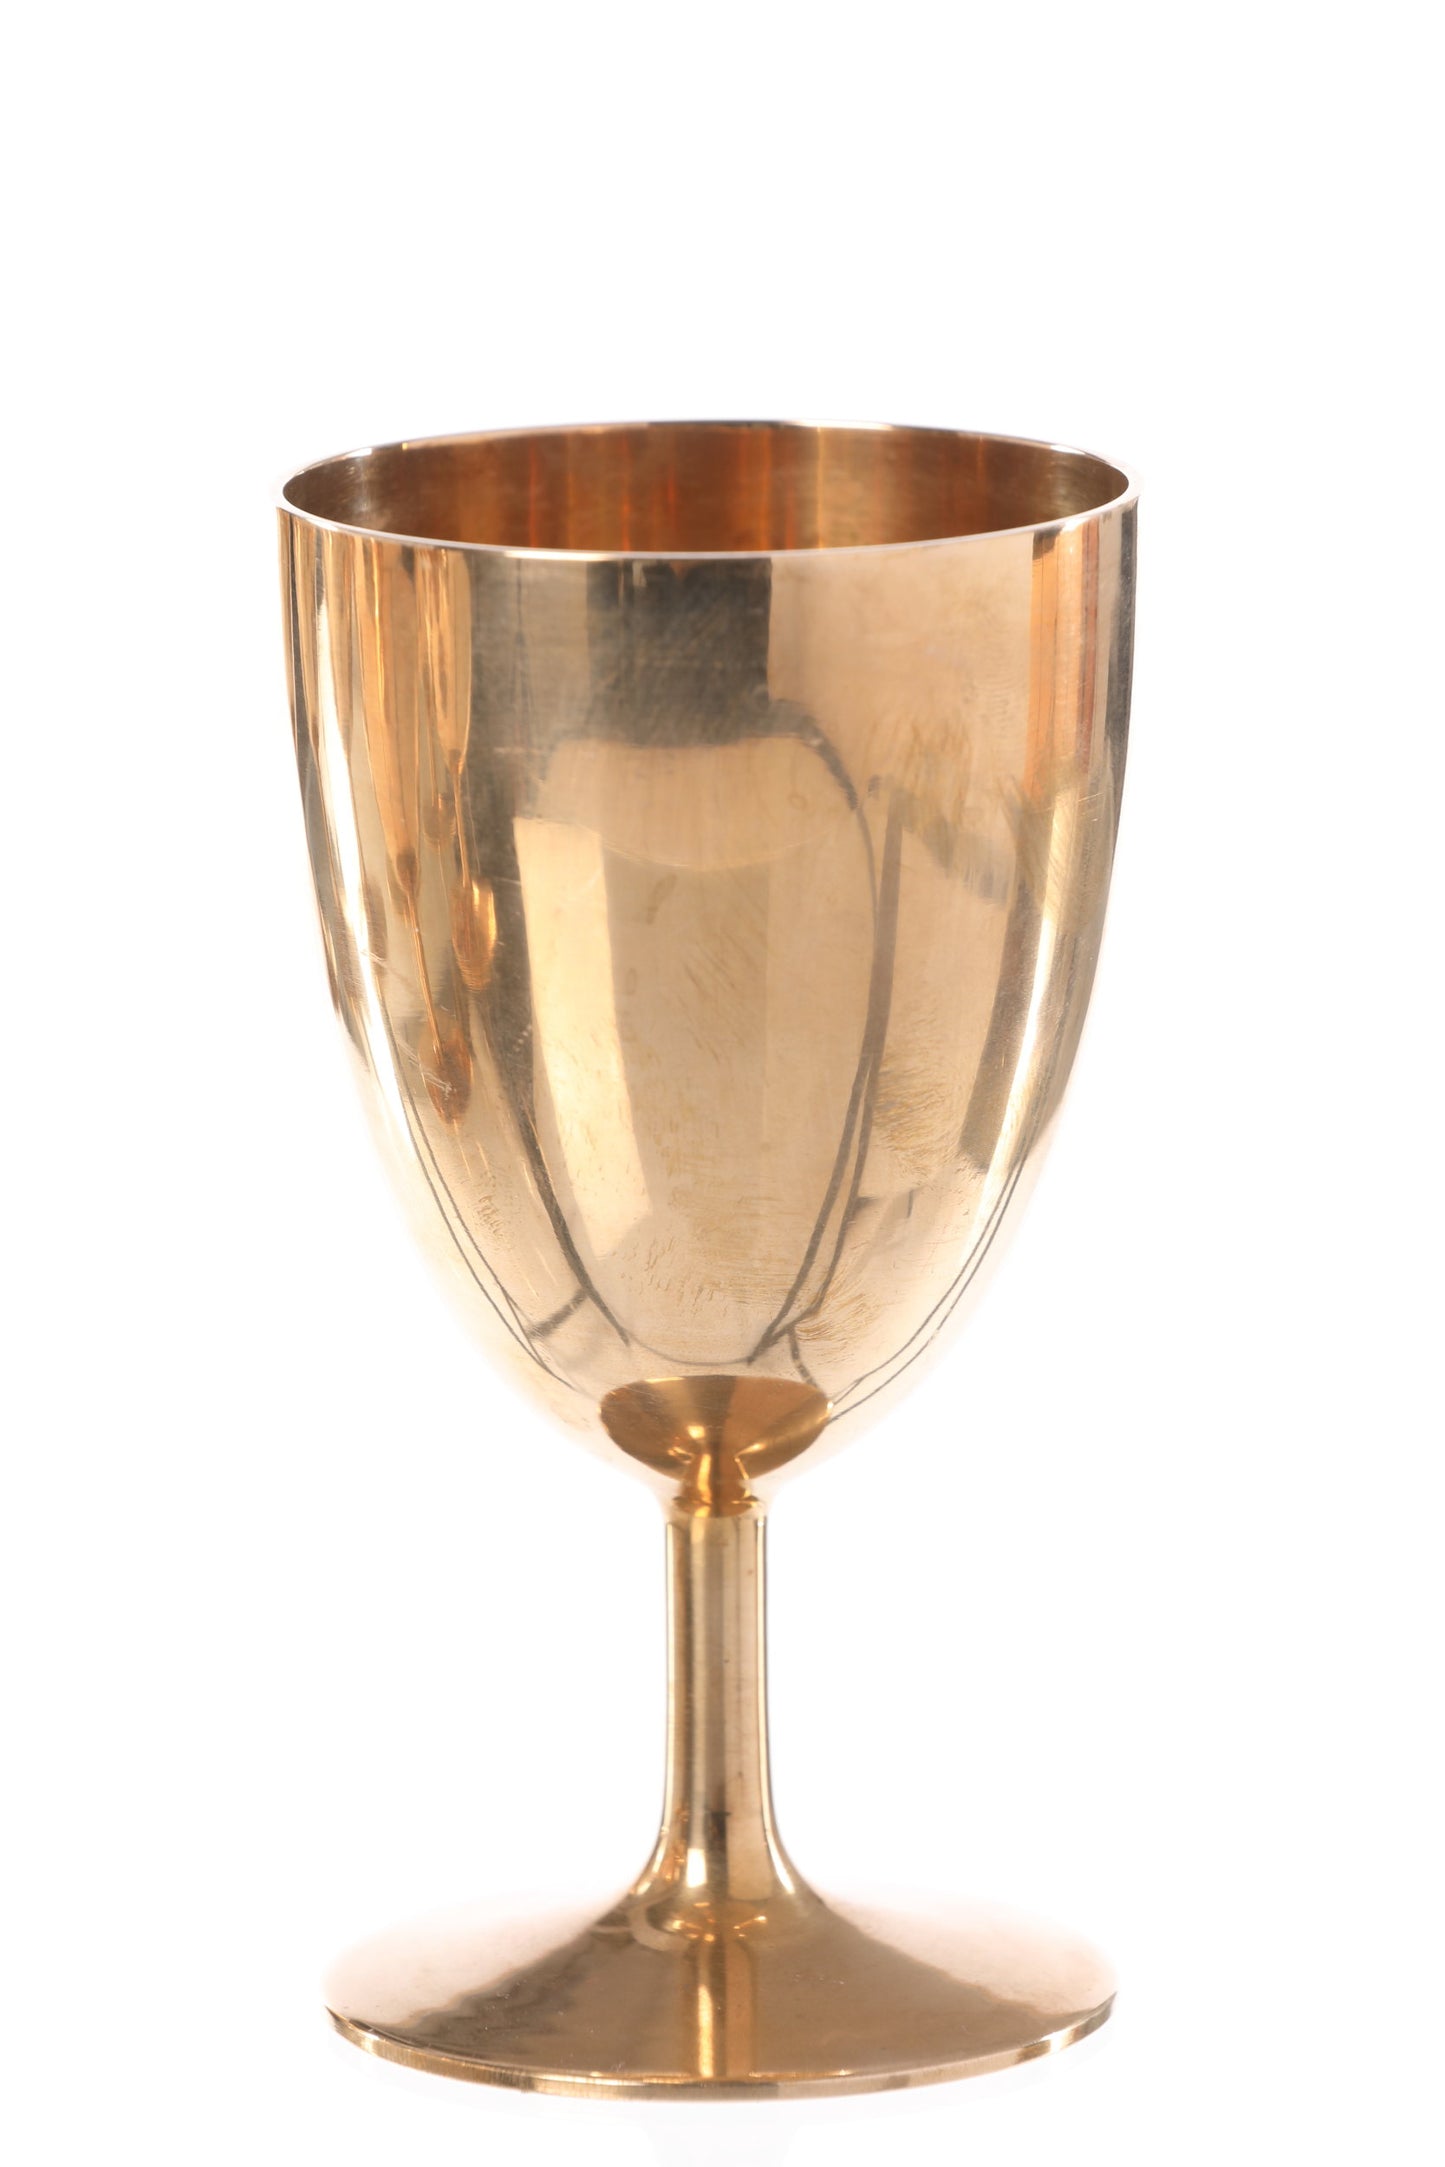 Goblet set with brass tray